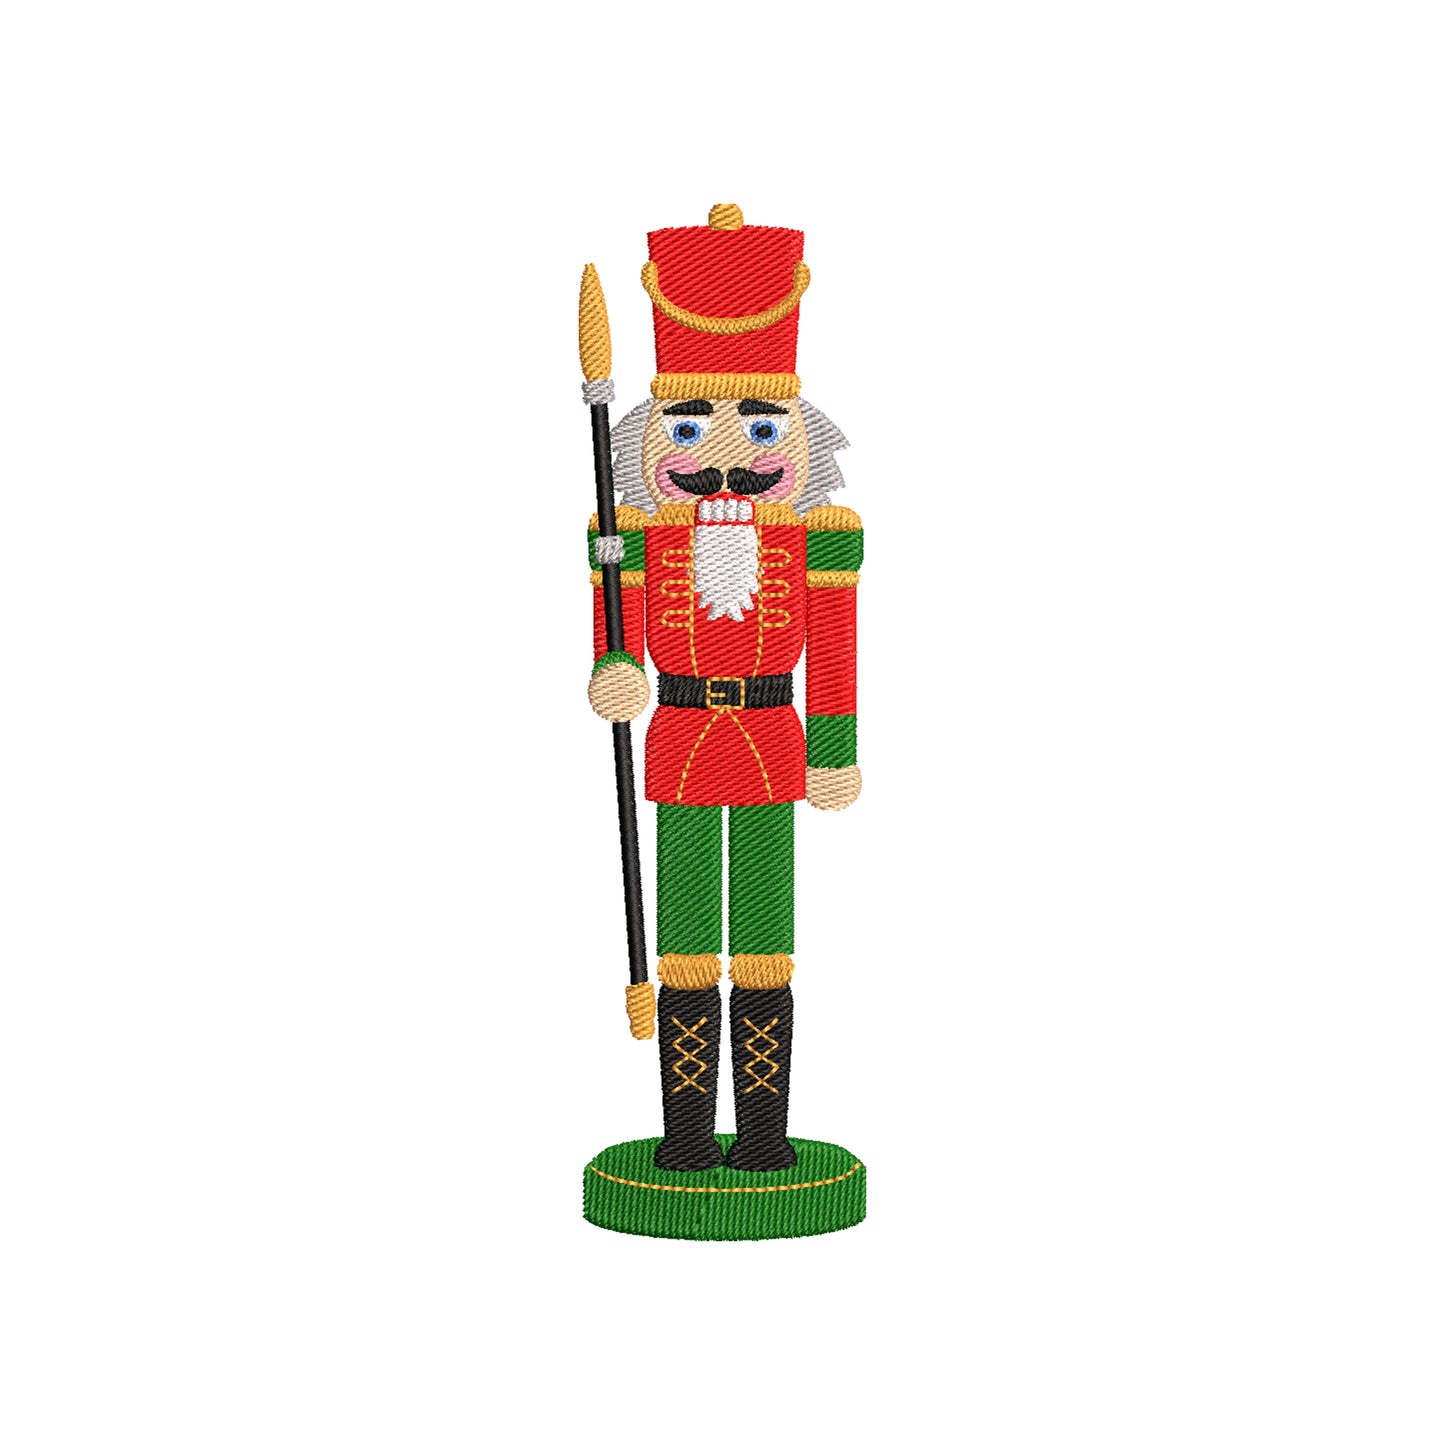 Toy soldier embroidery designs Christmas - 910303